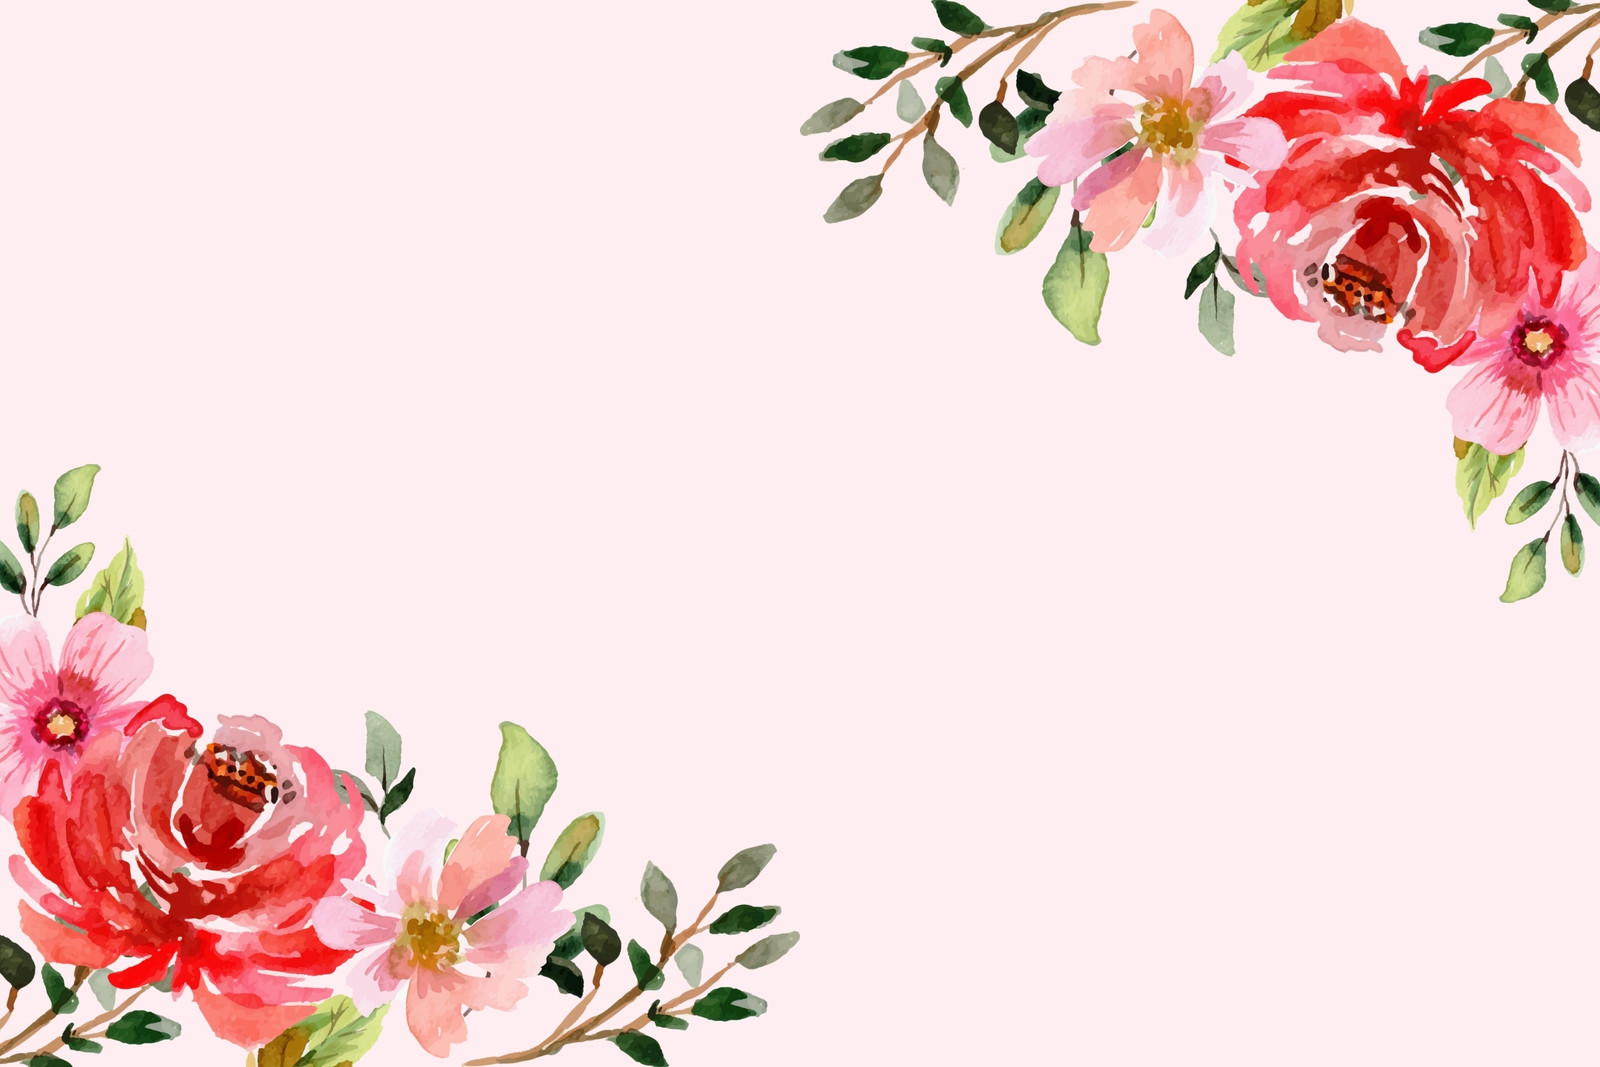 Flowers Pink Wallpaper Pretty Wall Papers 42+ Ideas #wallpaper | Flower  phone wallpaper, Pink flowers wallpaper, Flower background wallpaper